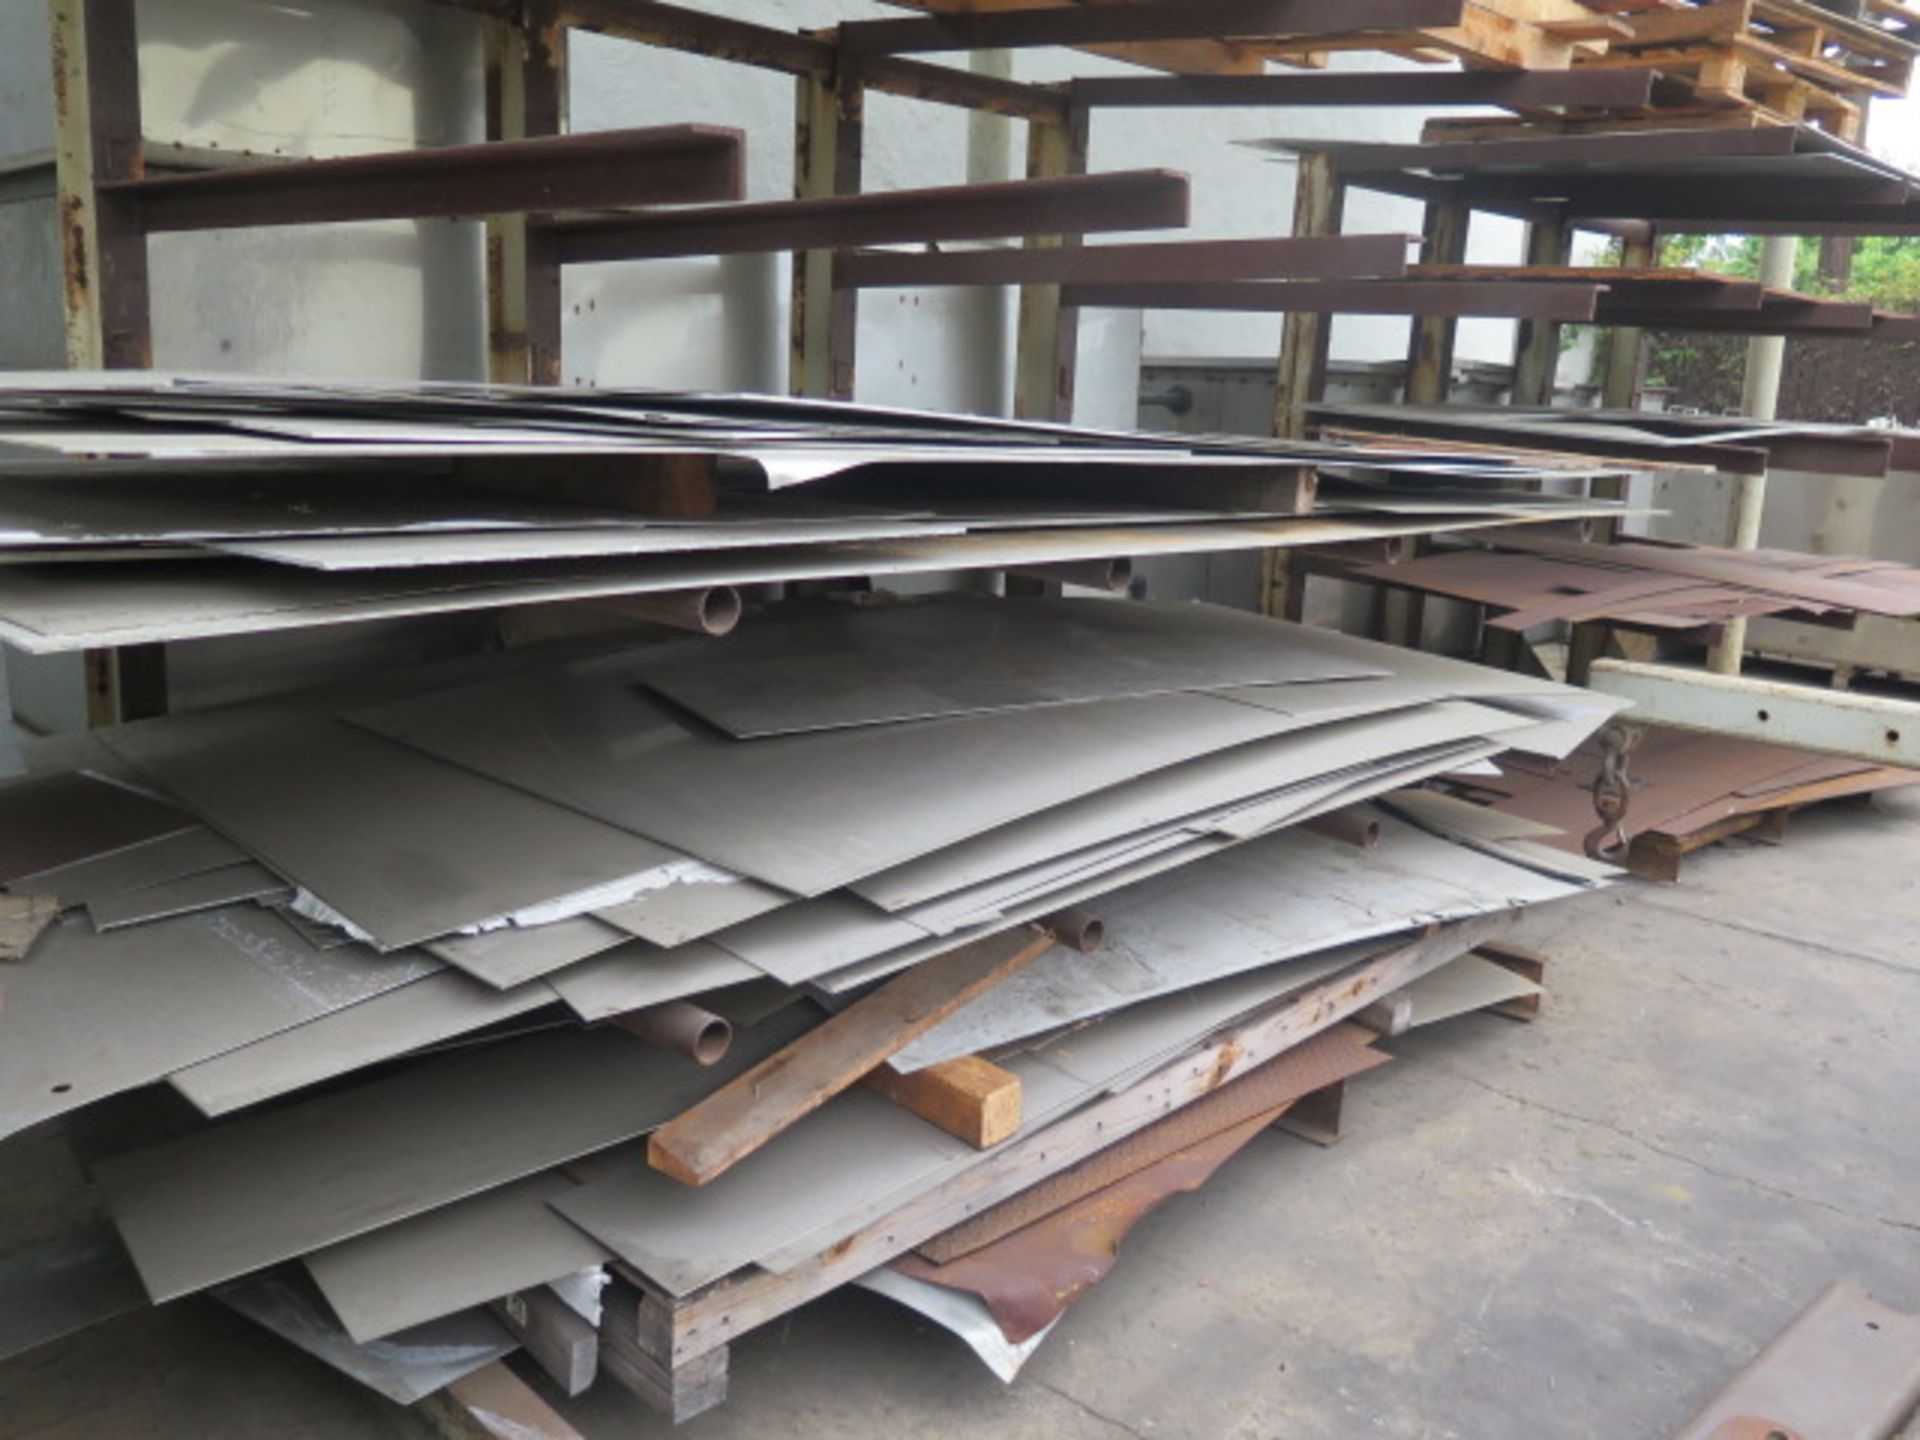 Stainless, Aluminum and Cold Roll Sheet Stock, Aluminum and Cold Roll Bar Stock w/ Racks - Image 2 of 7